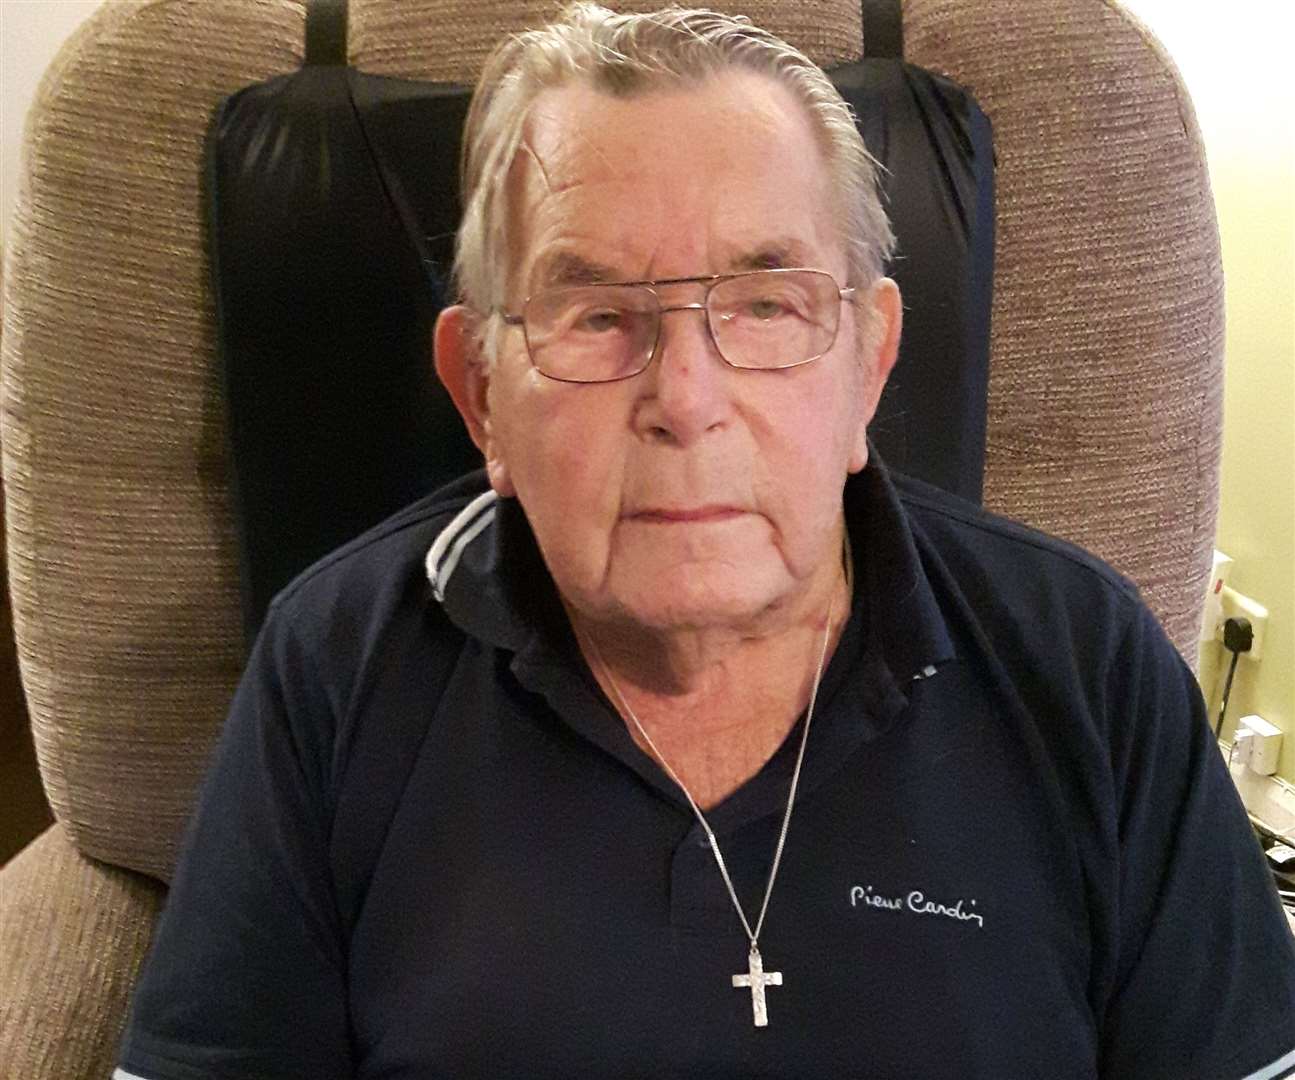 Retired Metropolitan police officer Les Alton recalled making the first ever arrest of the Kray twins